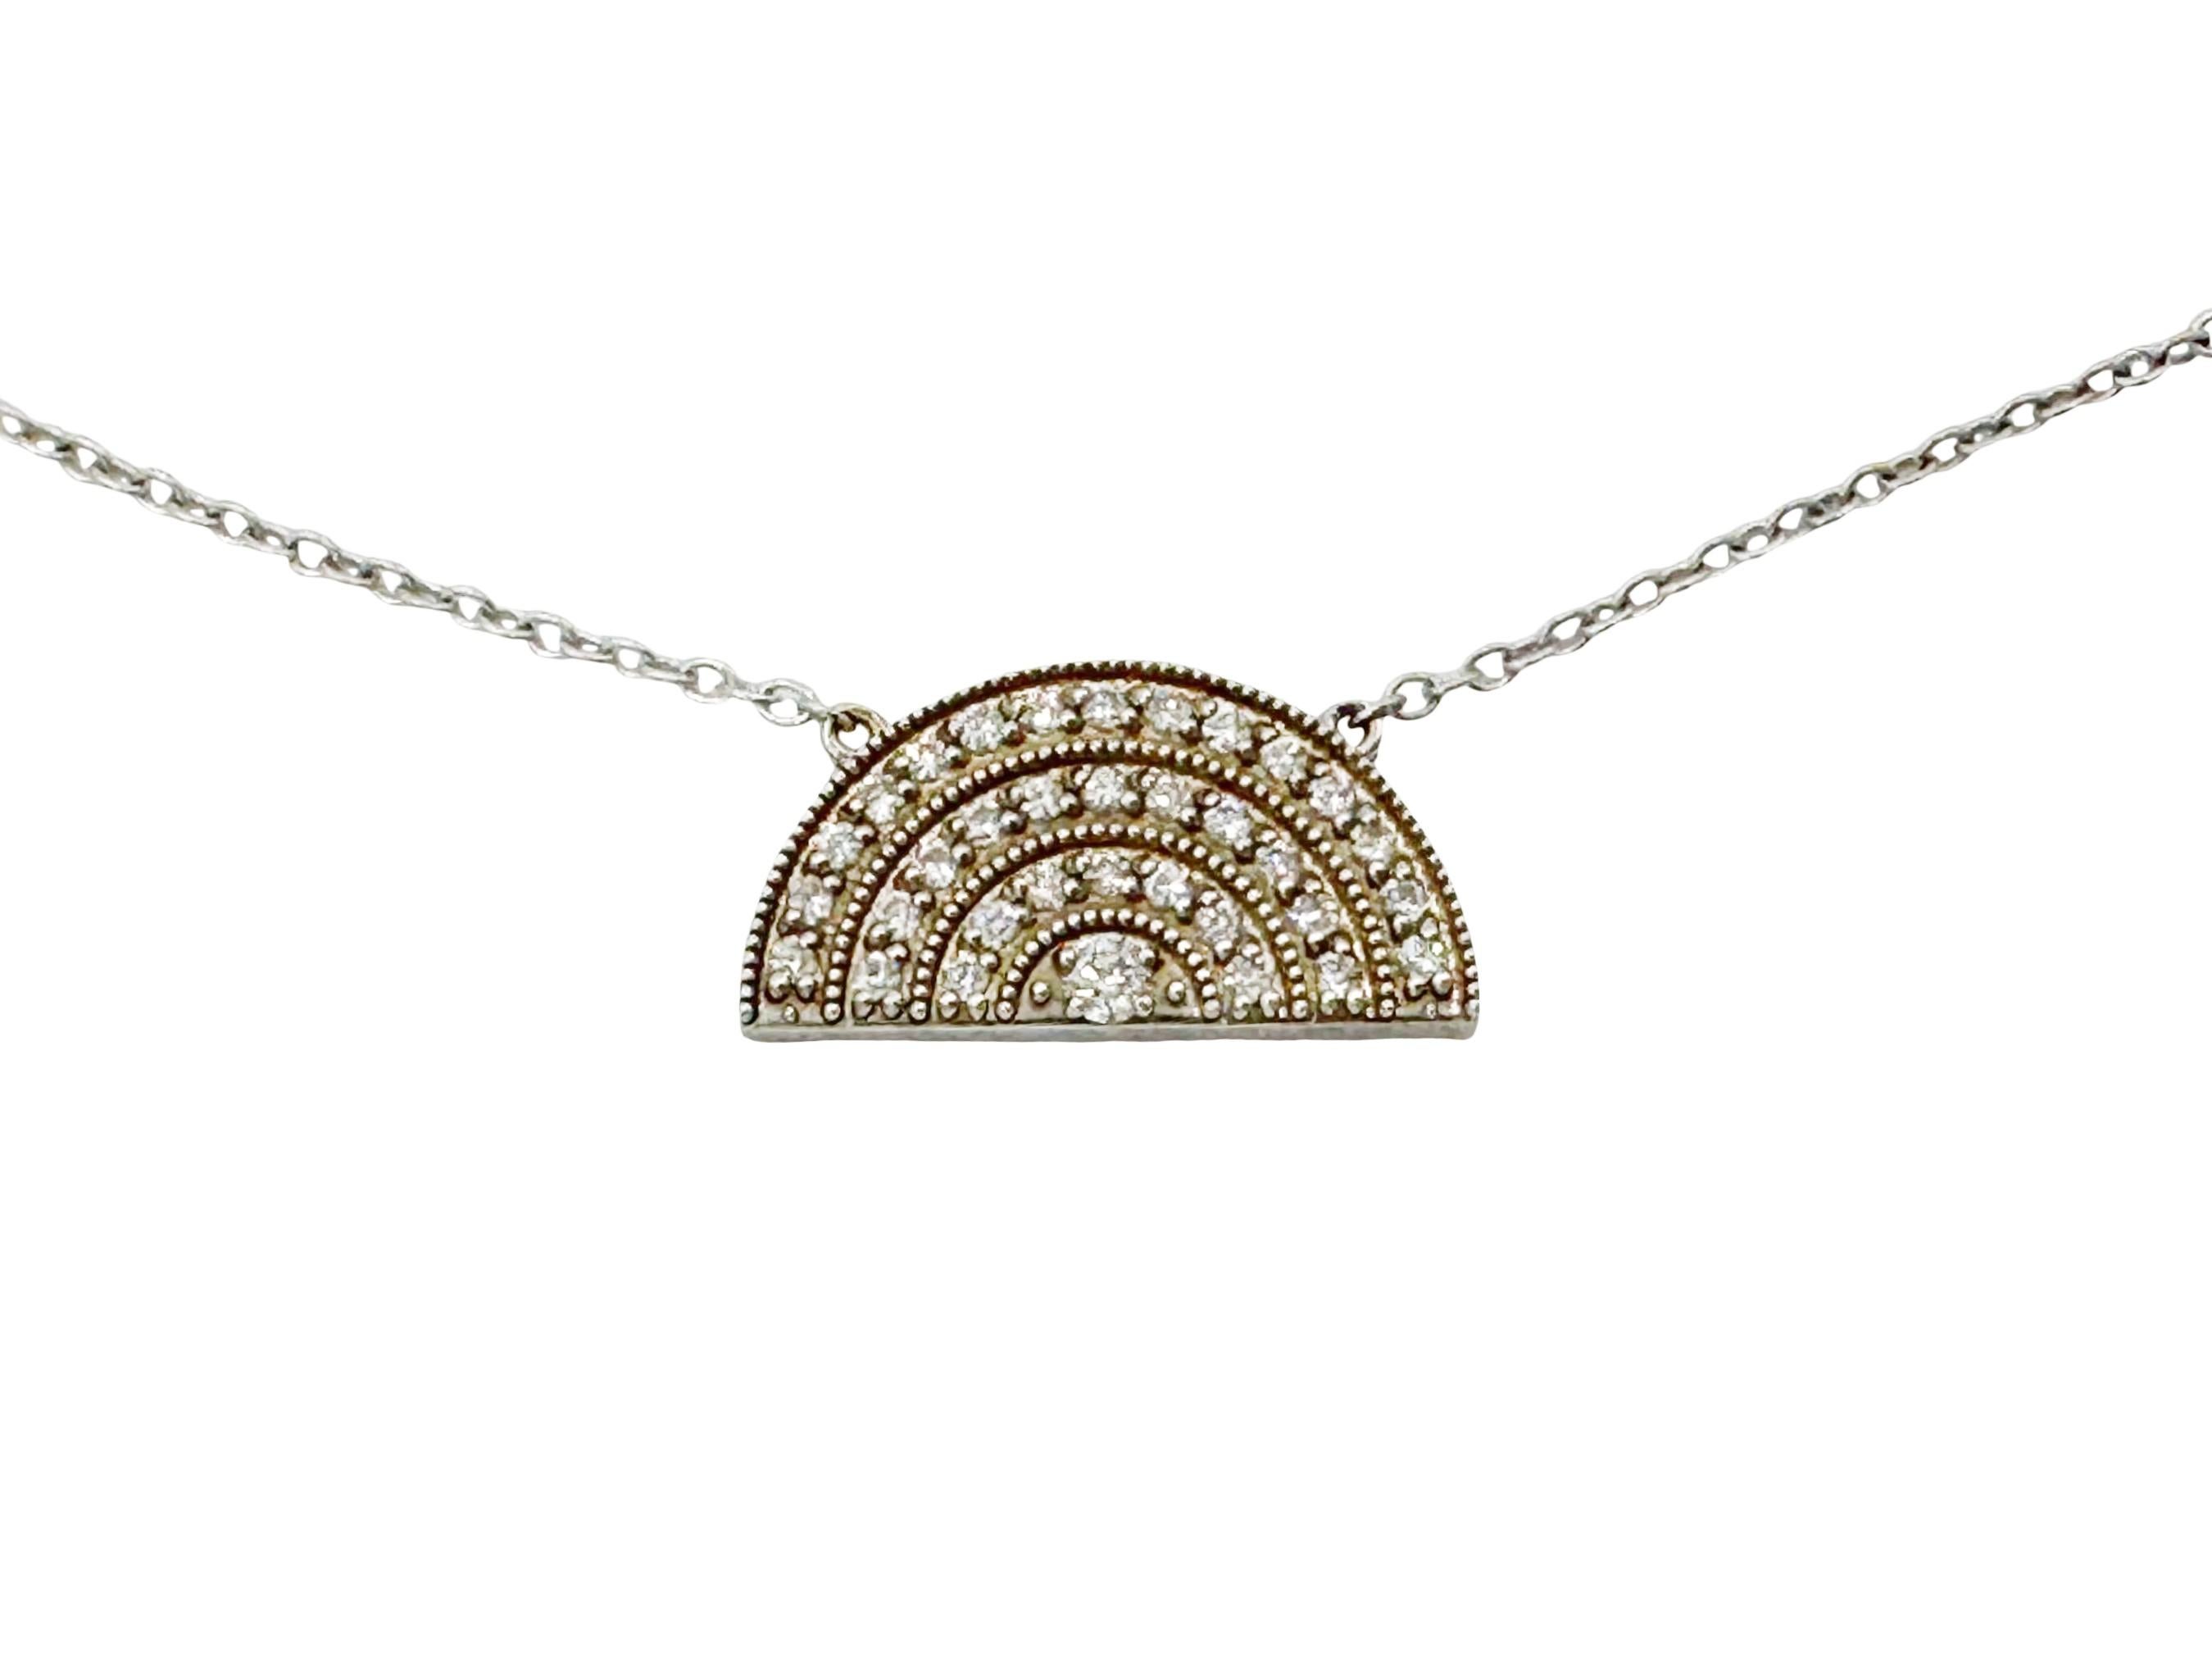 Playfully elegant, this small rainbow necklace is an Andrea Fohrman classic. Hand-wrought in 18K white gold and set with three rows of sparkling diamonds surrounding a center diamond stone, the pendant hangs from an 18k white gold rolo chain. Alone